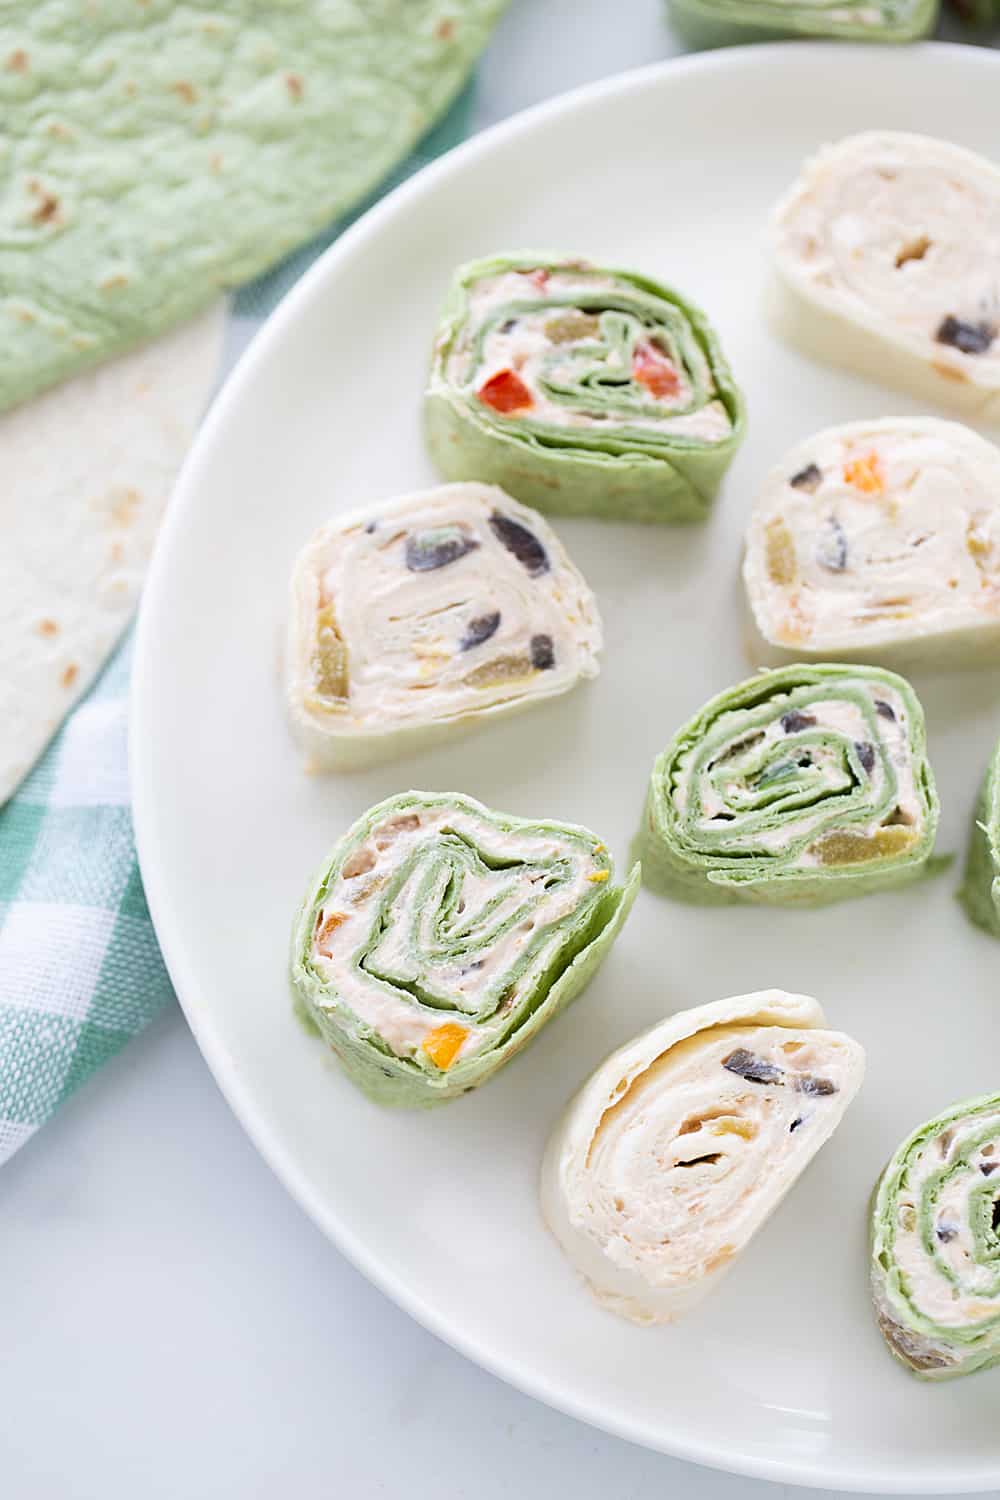 Mexican Pinwheels - Mexican pinwheels are the best appetizer! They're so eays and so flavorful. And even better, you can make them a day ahead! #appetizer #halfscratched #pinwheels #appetizerrecipe #partyfood #easyrecipe #easyappetizer #creamcheese